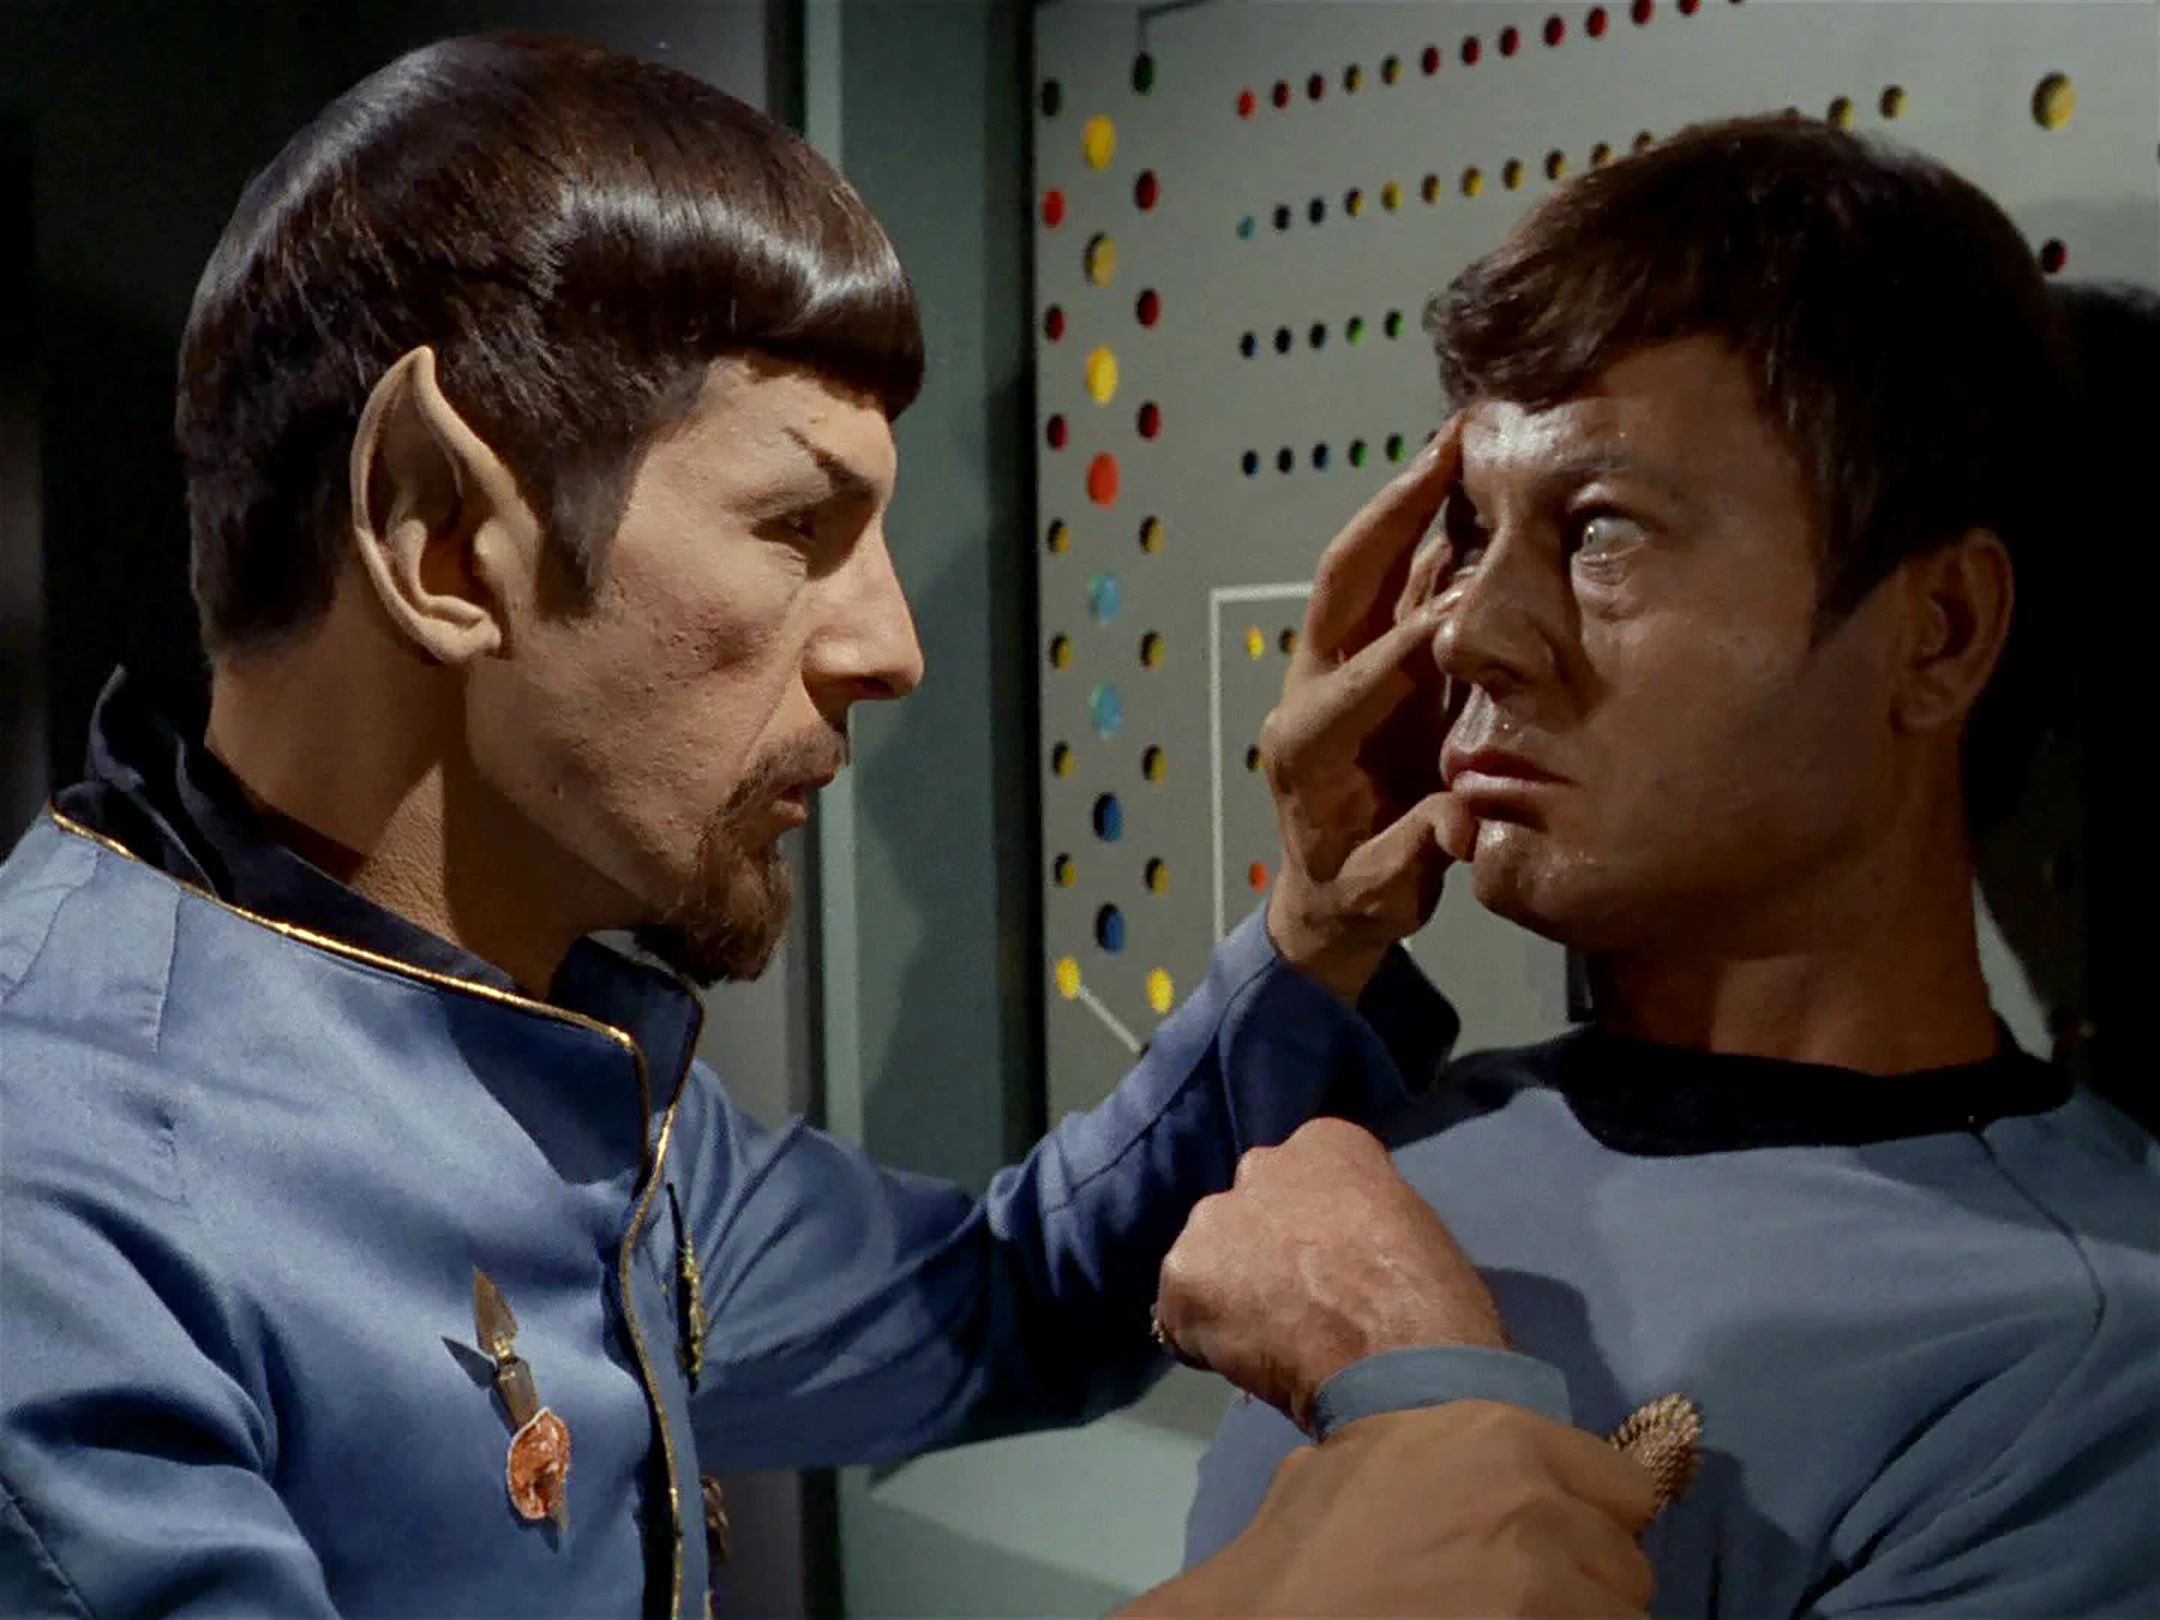 A bearded Spock performing a Vulcan mind meld on Dr. McCoy in Star Trek